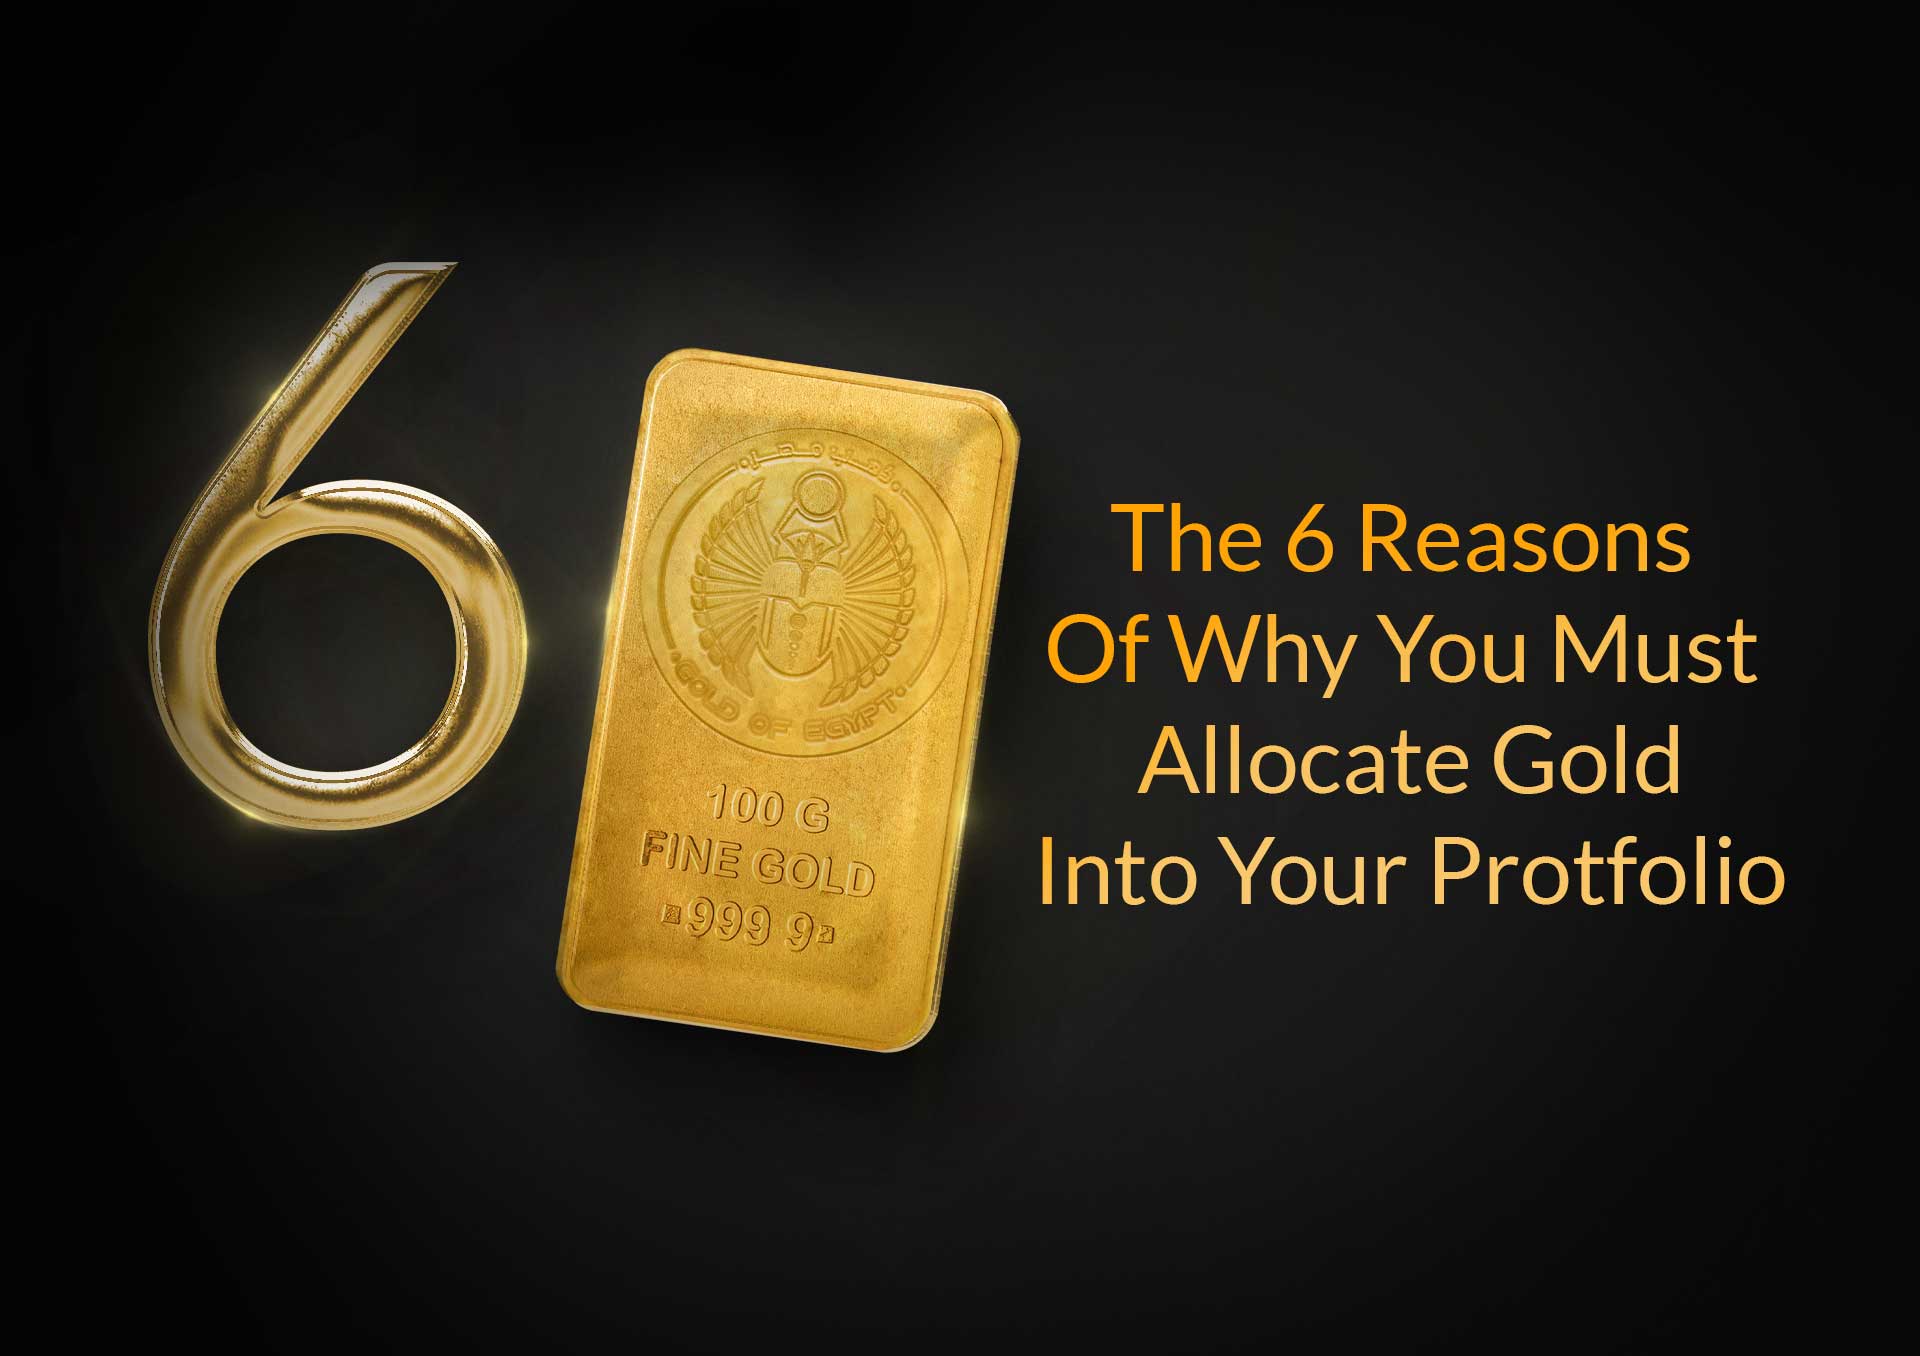 Six reasons of why you must allocate gold into your portfolio 